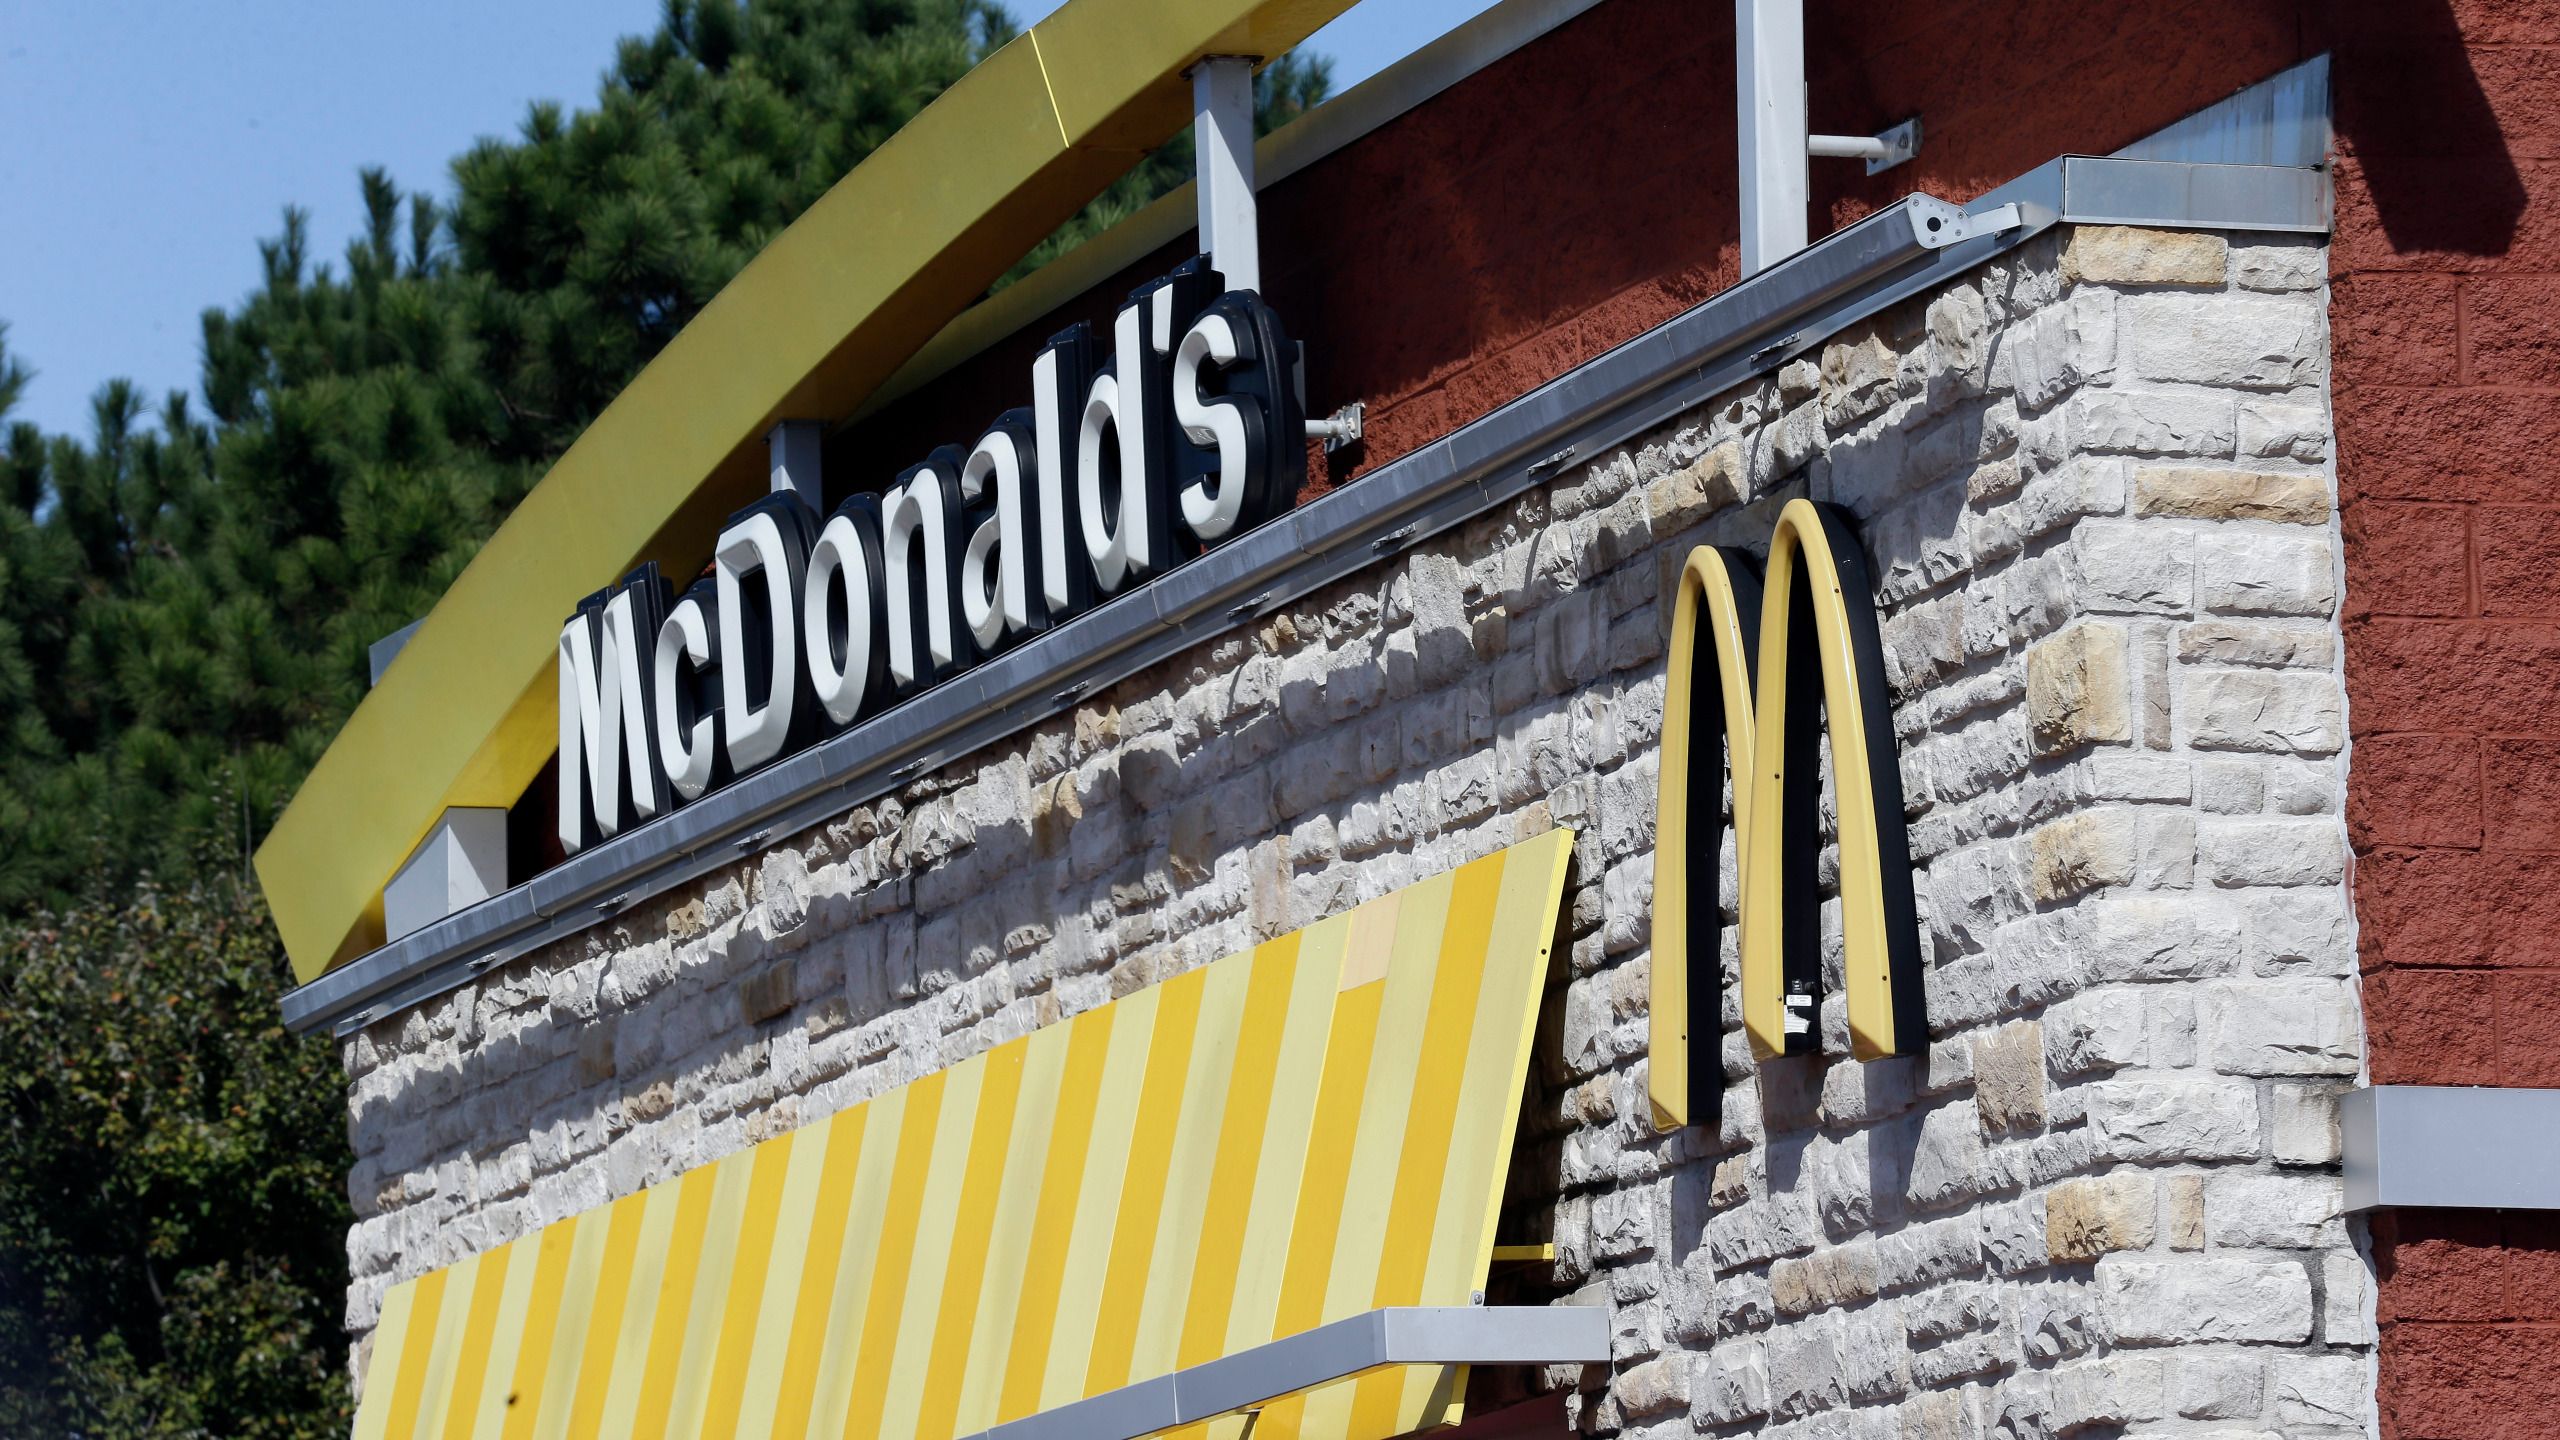 Local McDonald's Restaurants expect to hire 160 new employees throughout this summer